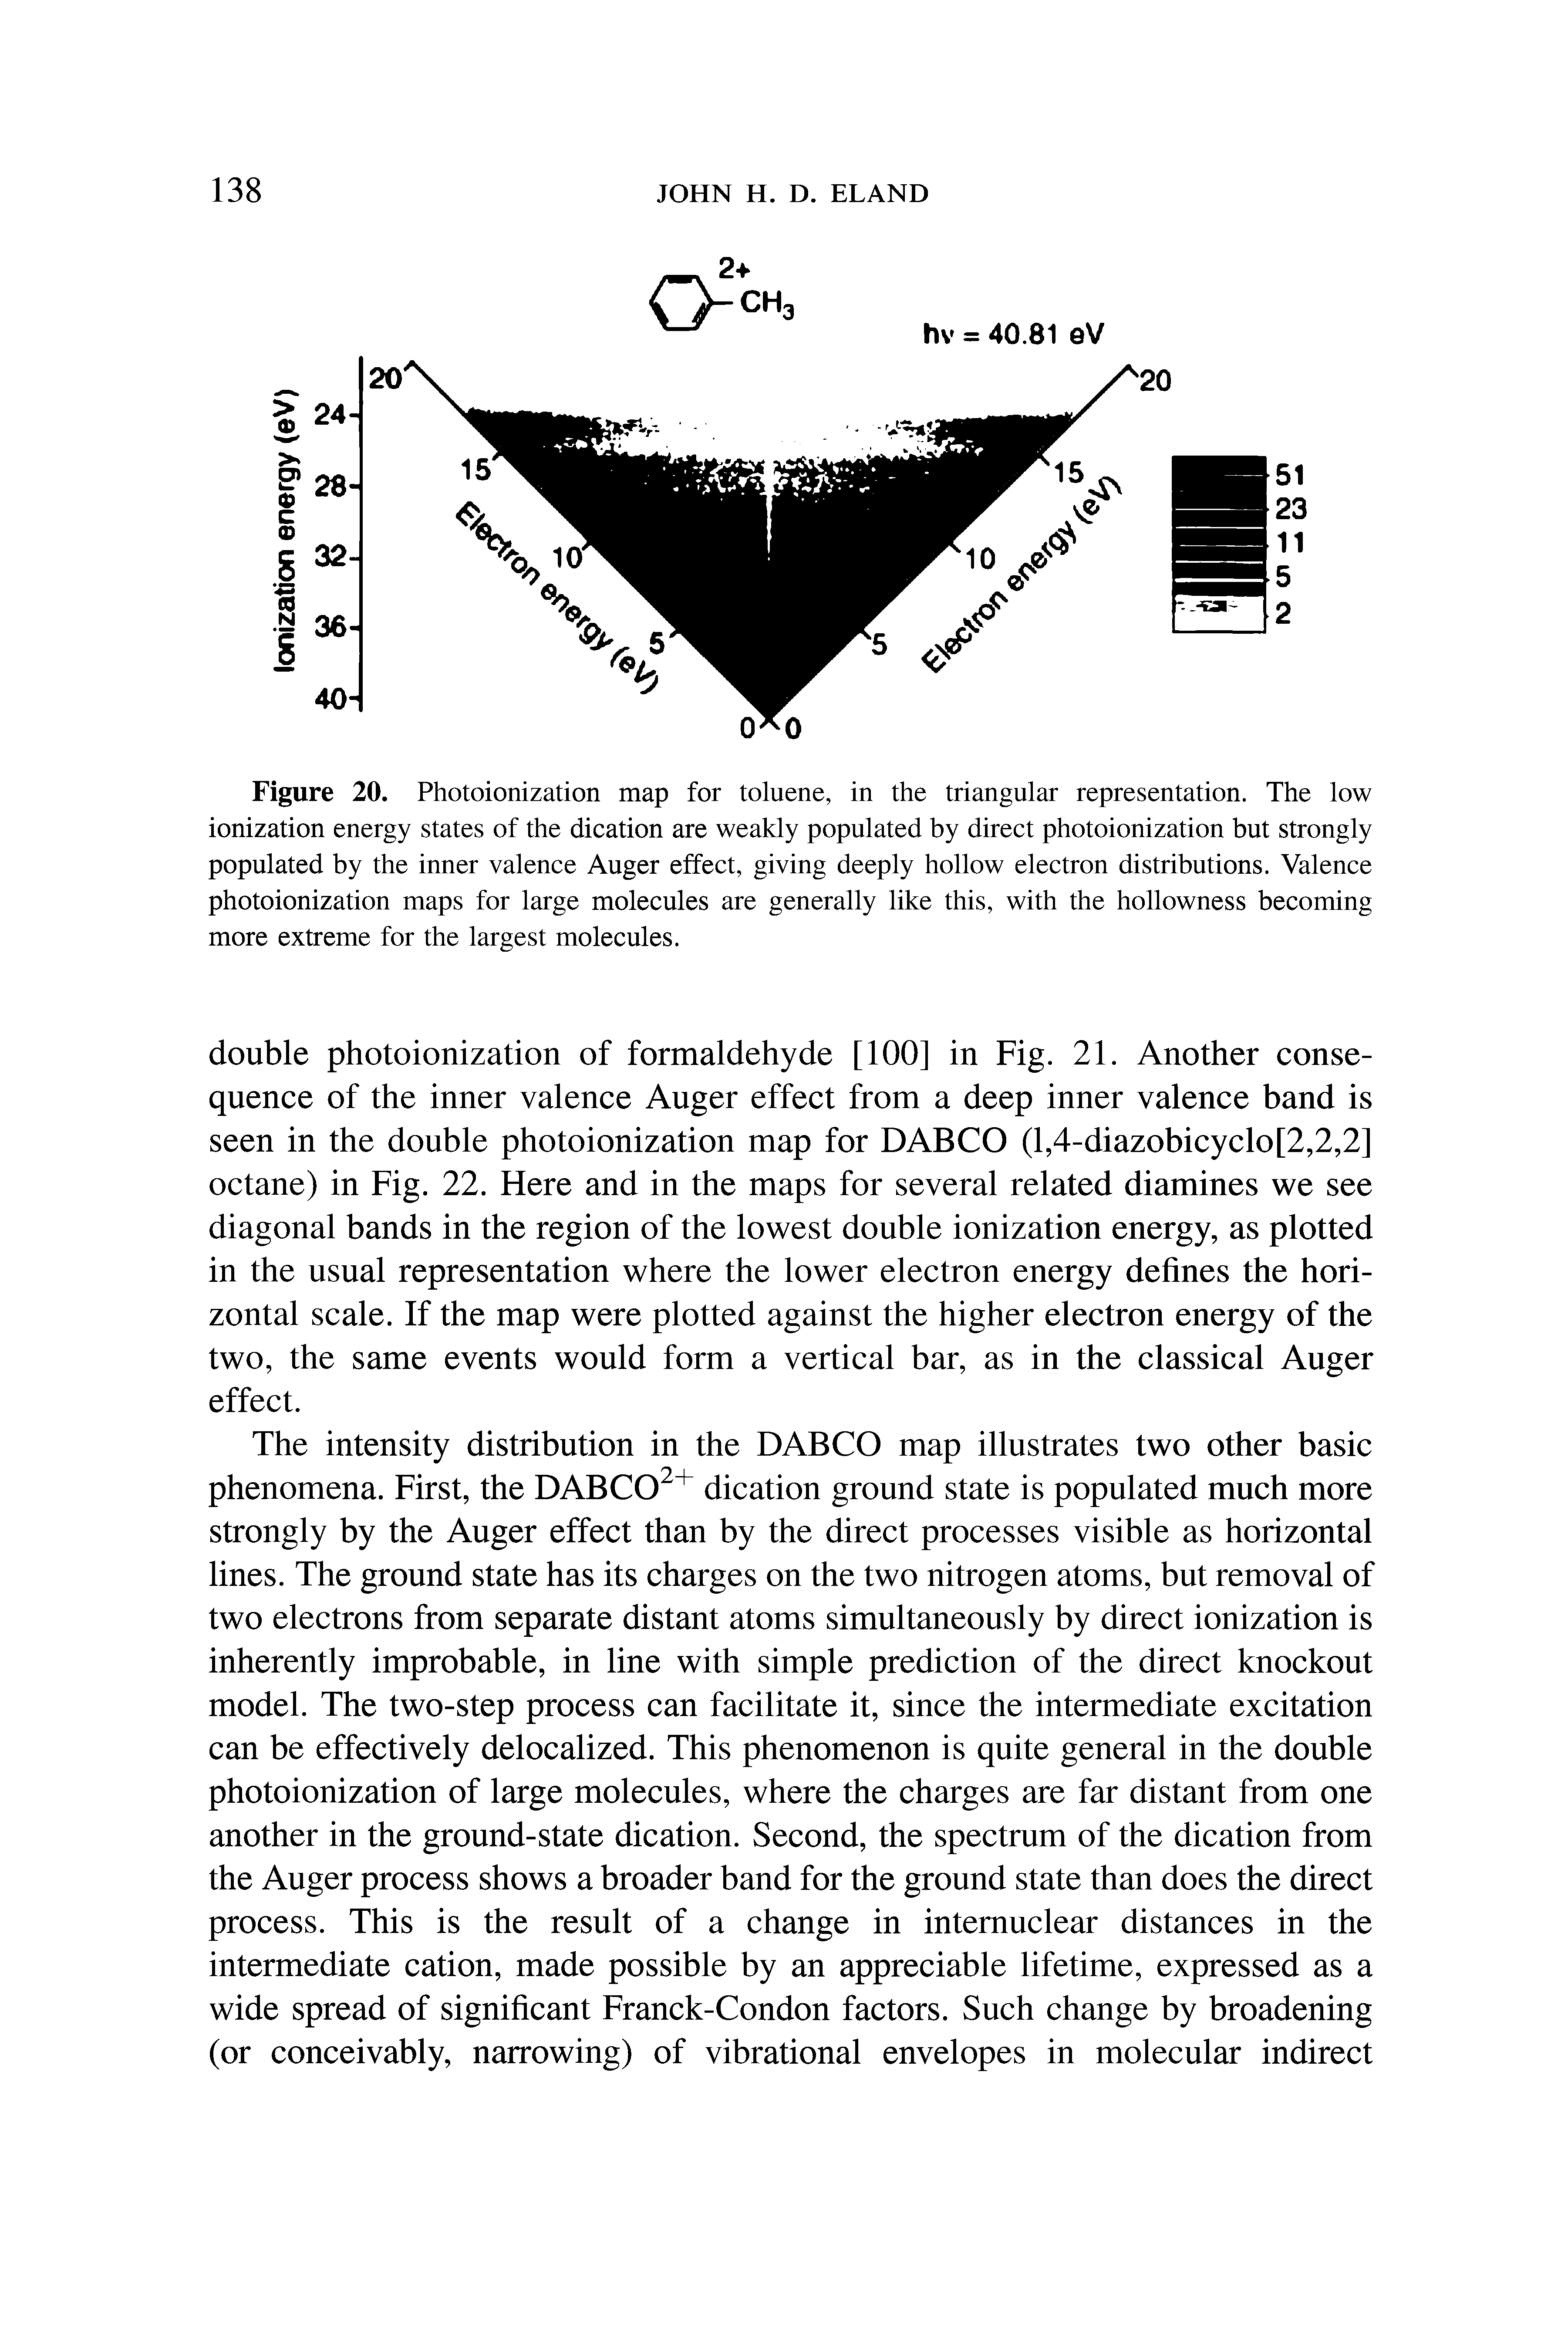 Figure 20. Photoionization map for toluene, in the triangular representation. The low ionization energy states of the dication are weakly populated by direct photoionization but strongly populated by the inner valence Auger effect, giving deeply hollow electron distributions. Valence photoionization maps for large molecules are generally like this, with the hollowness becoming more extreme for the largest molecules.